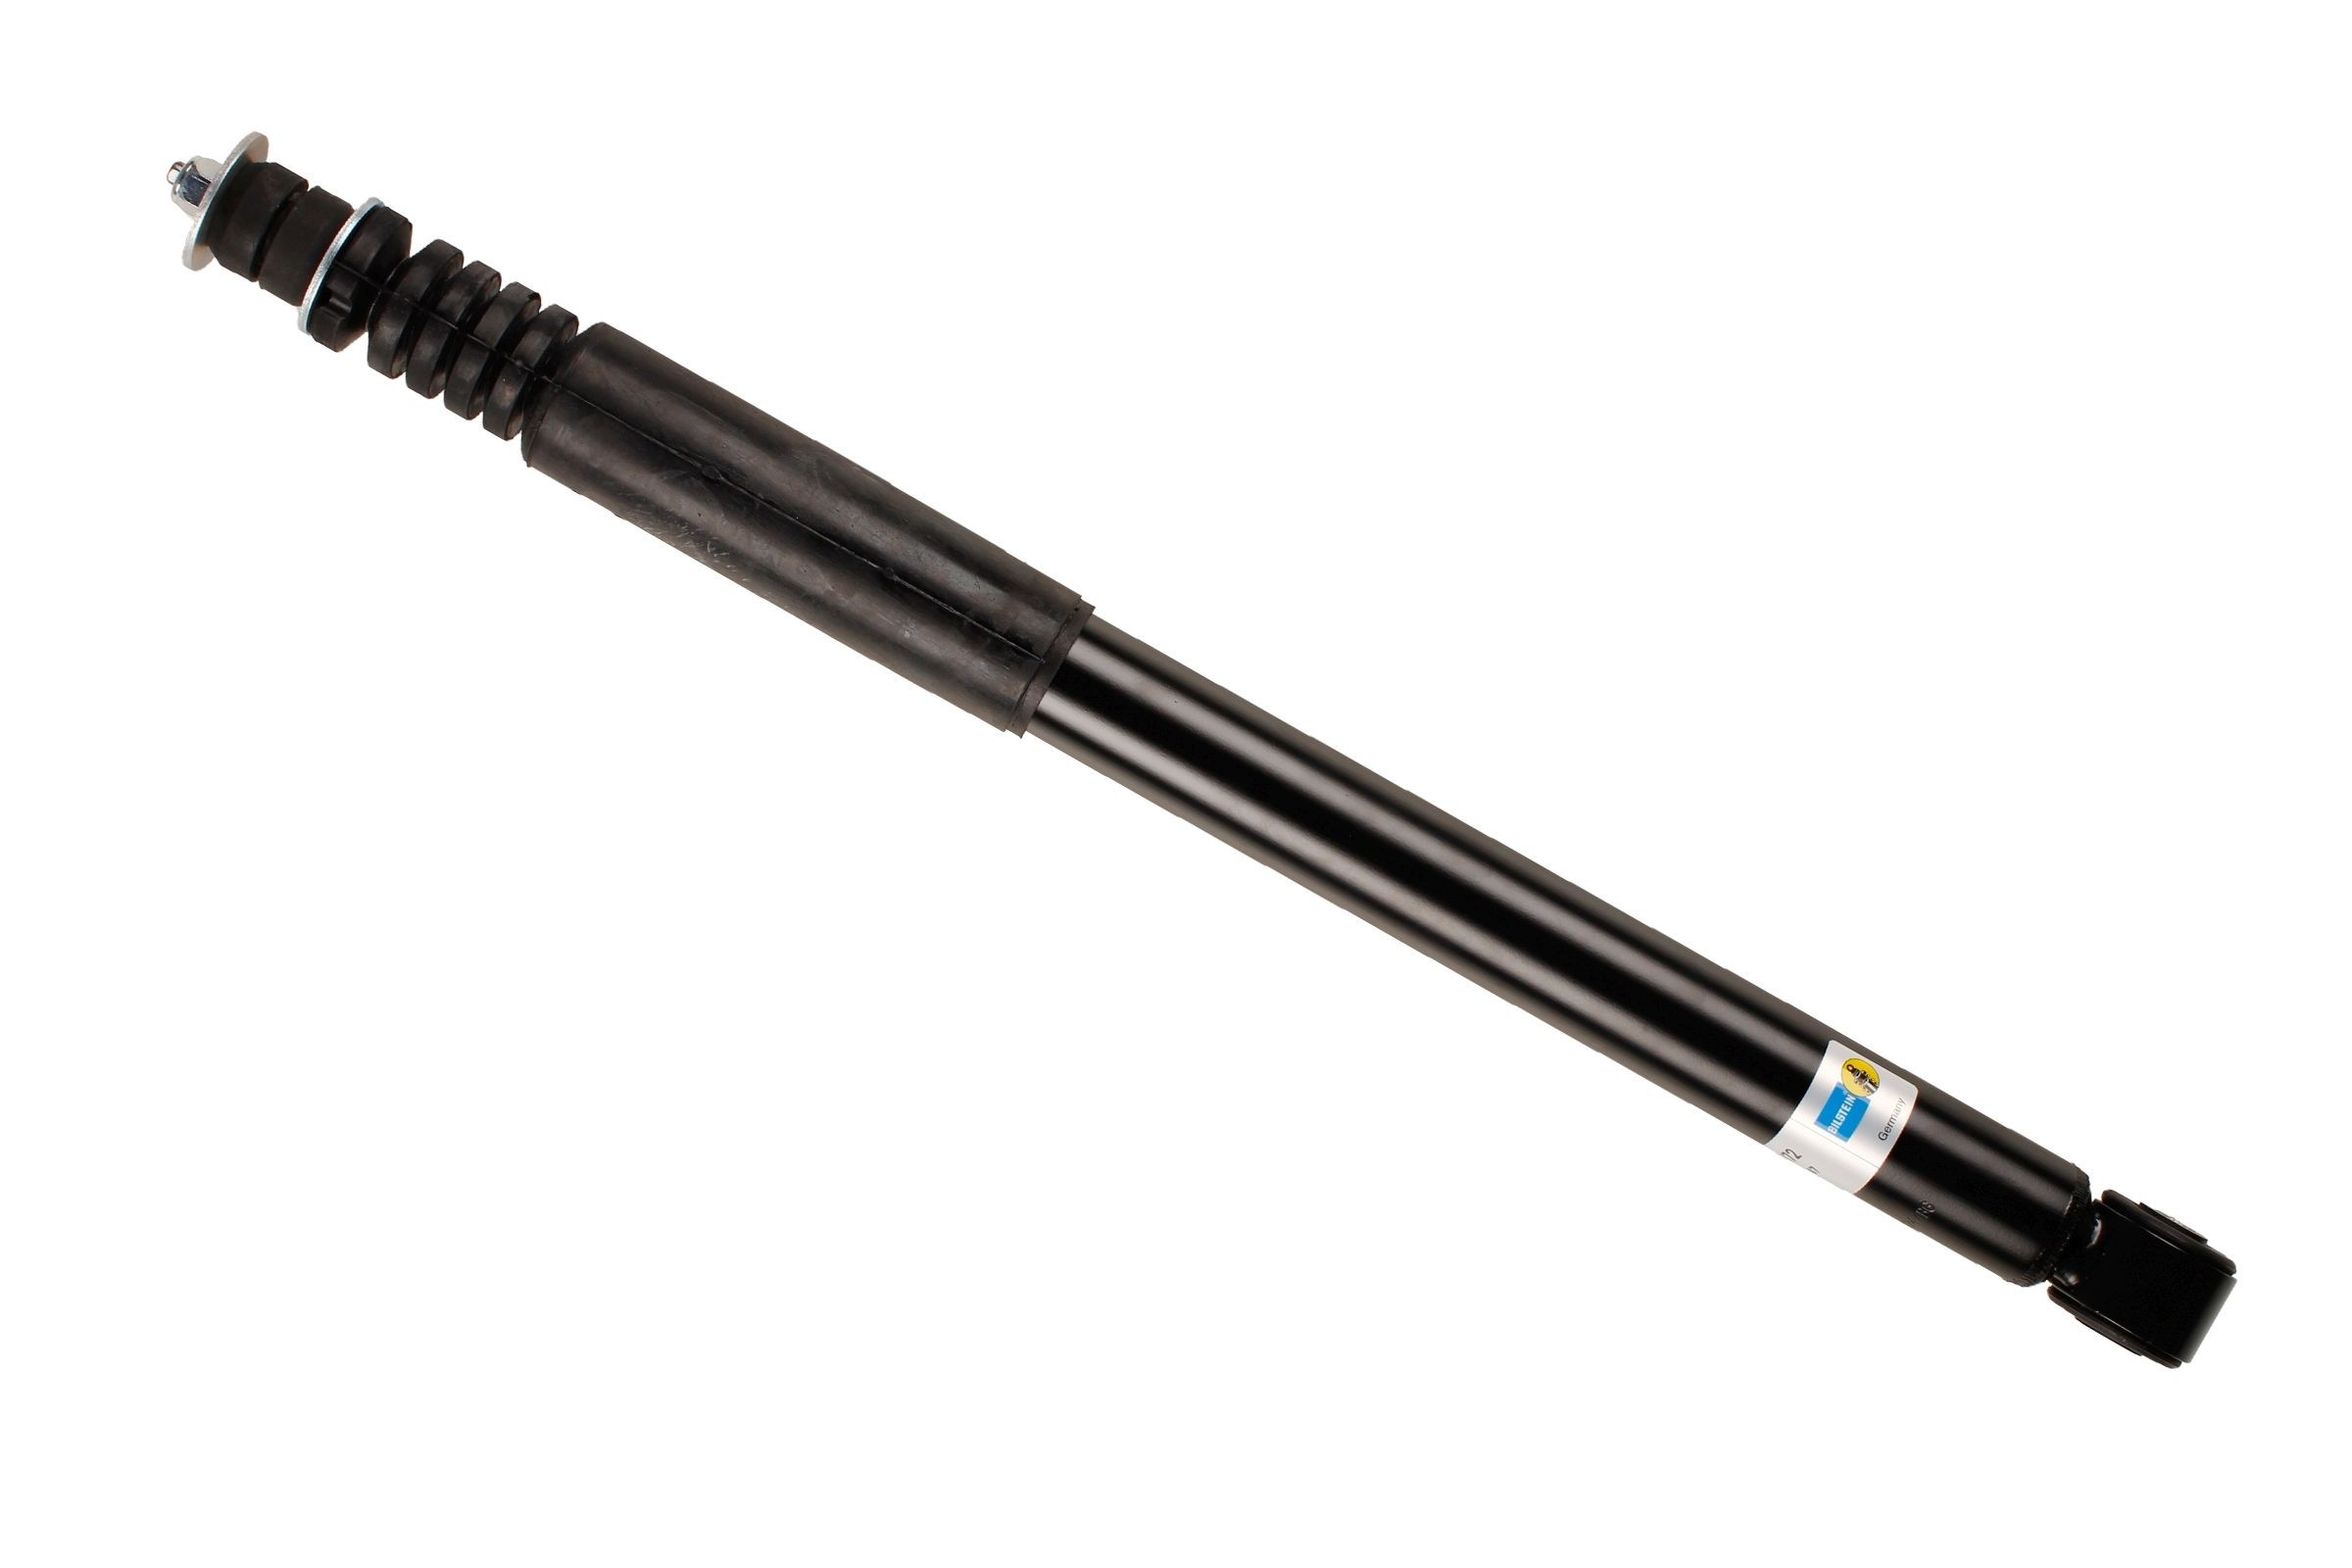 BNE-C247 BILSTEIN - B4 OE Replacement Rear Axle, Gas Pressure, Twin-Tube, Absorber does not carry a spring, Bottom eye, Top pin Shocks 19-122472 buy